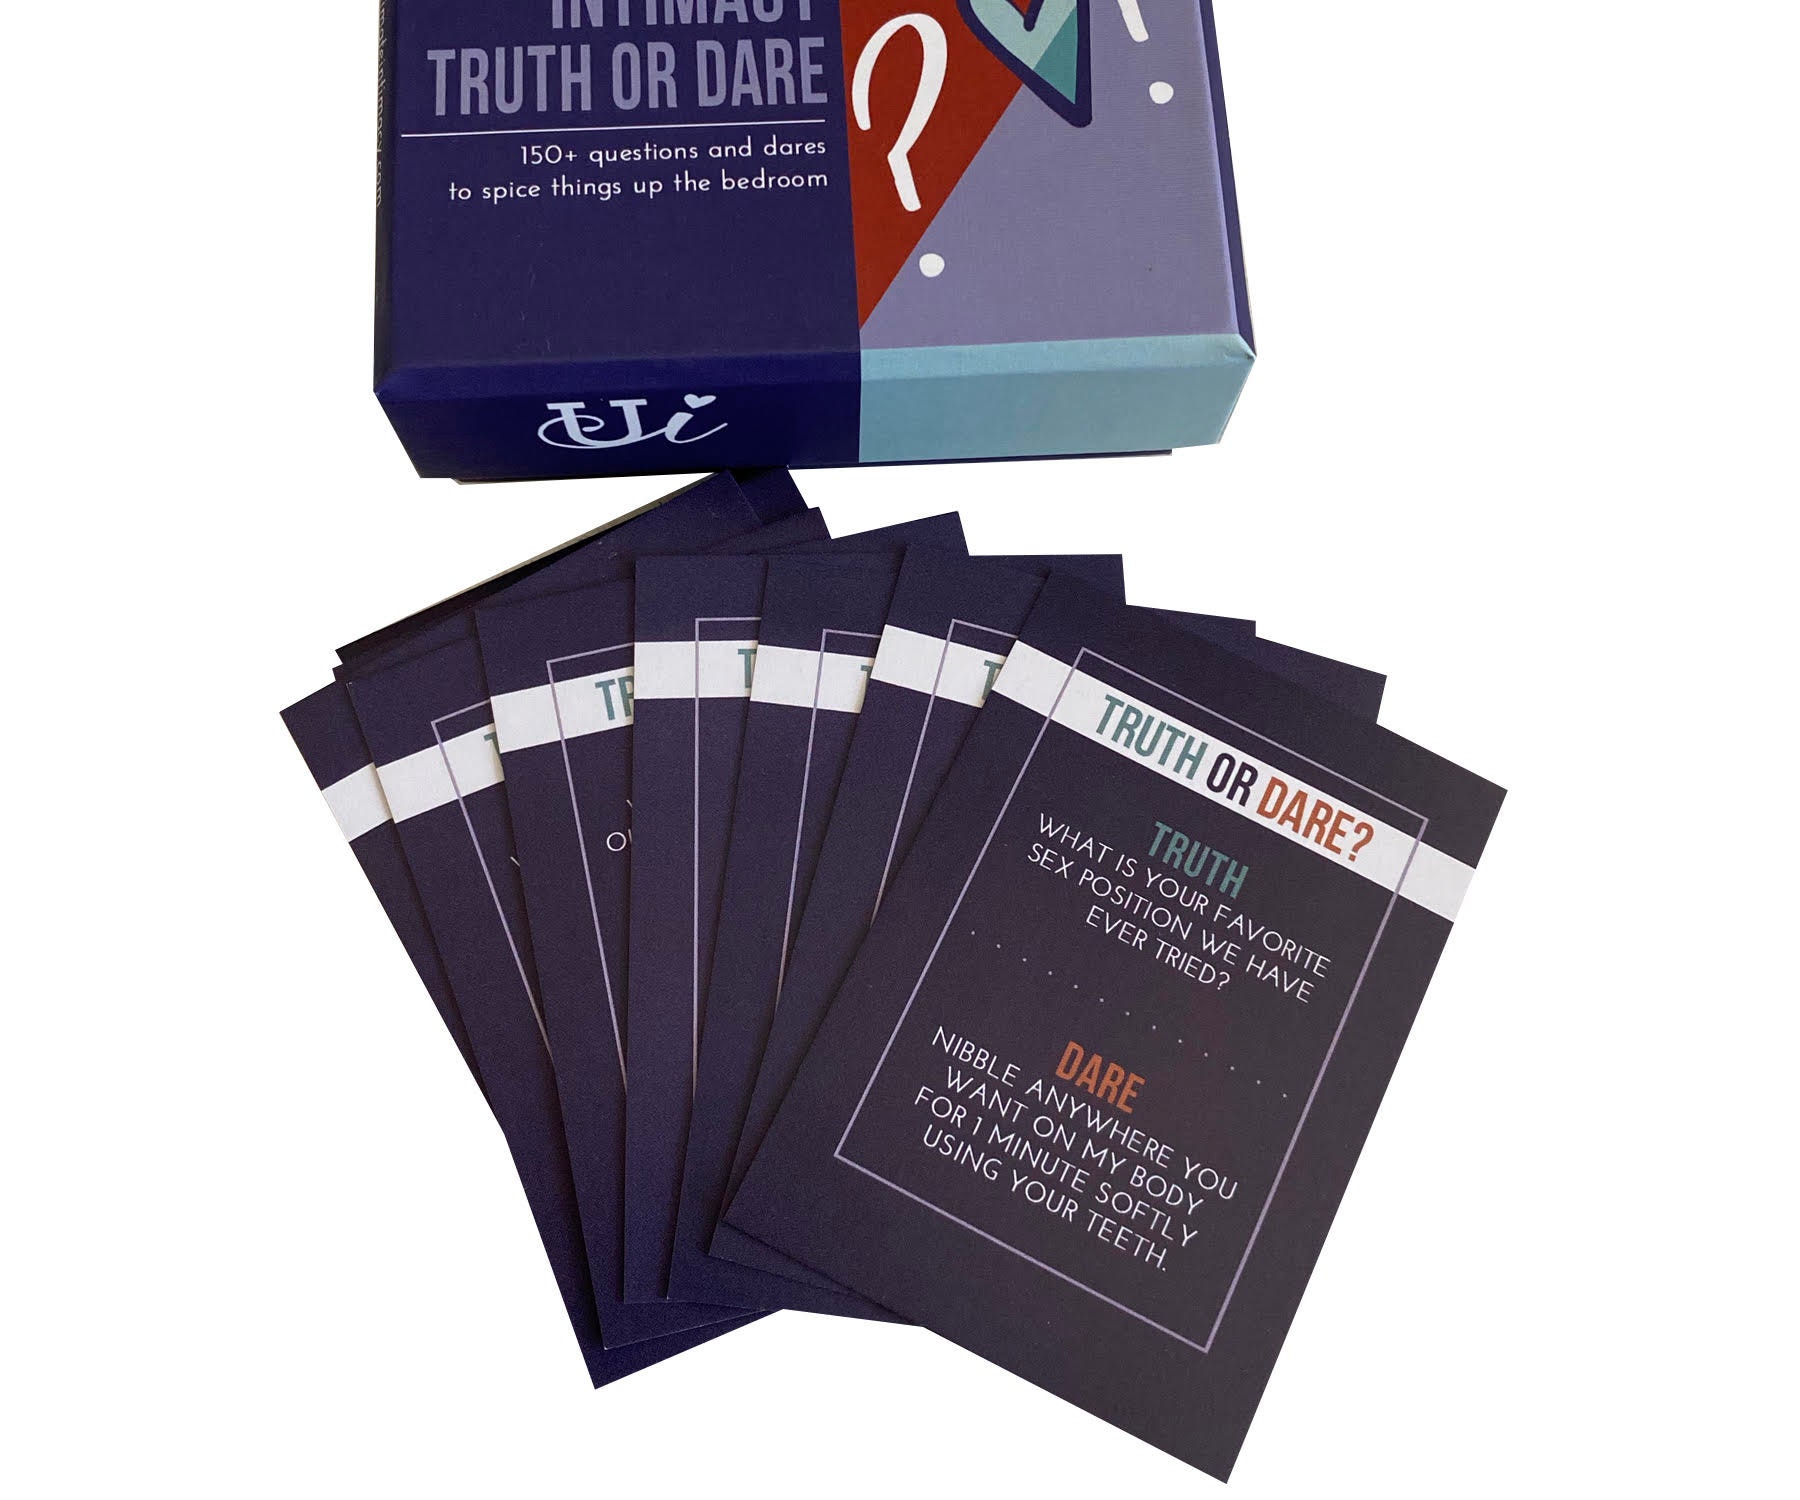 Ultimate Intimacy Truth or Dare Card Deck Bedroom Game Date